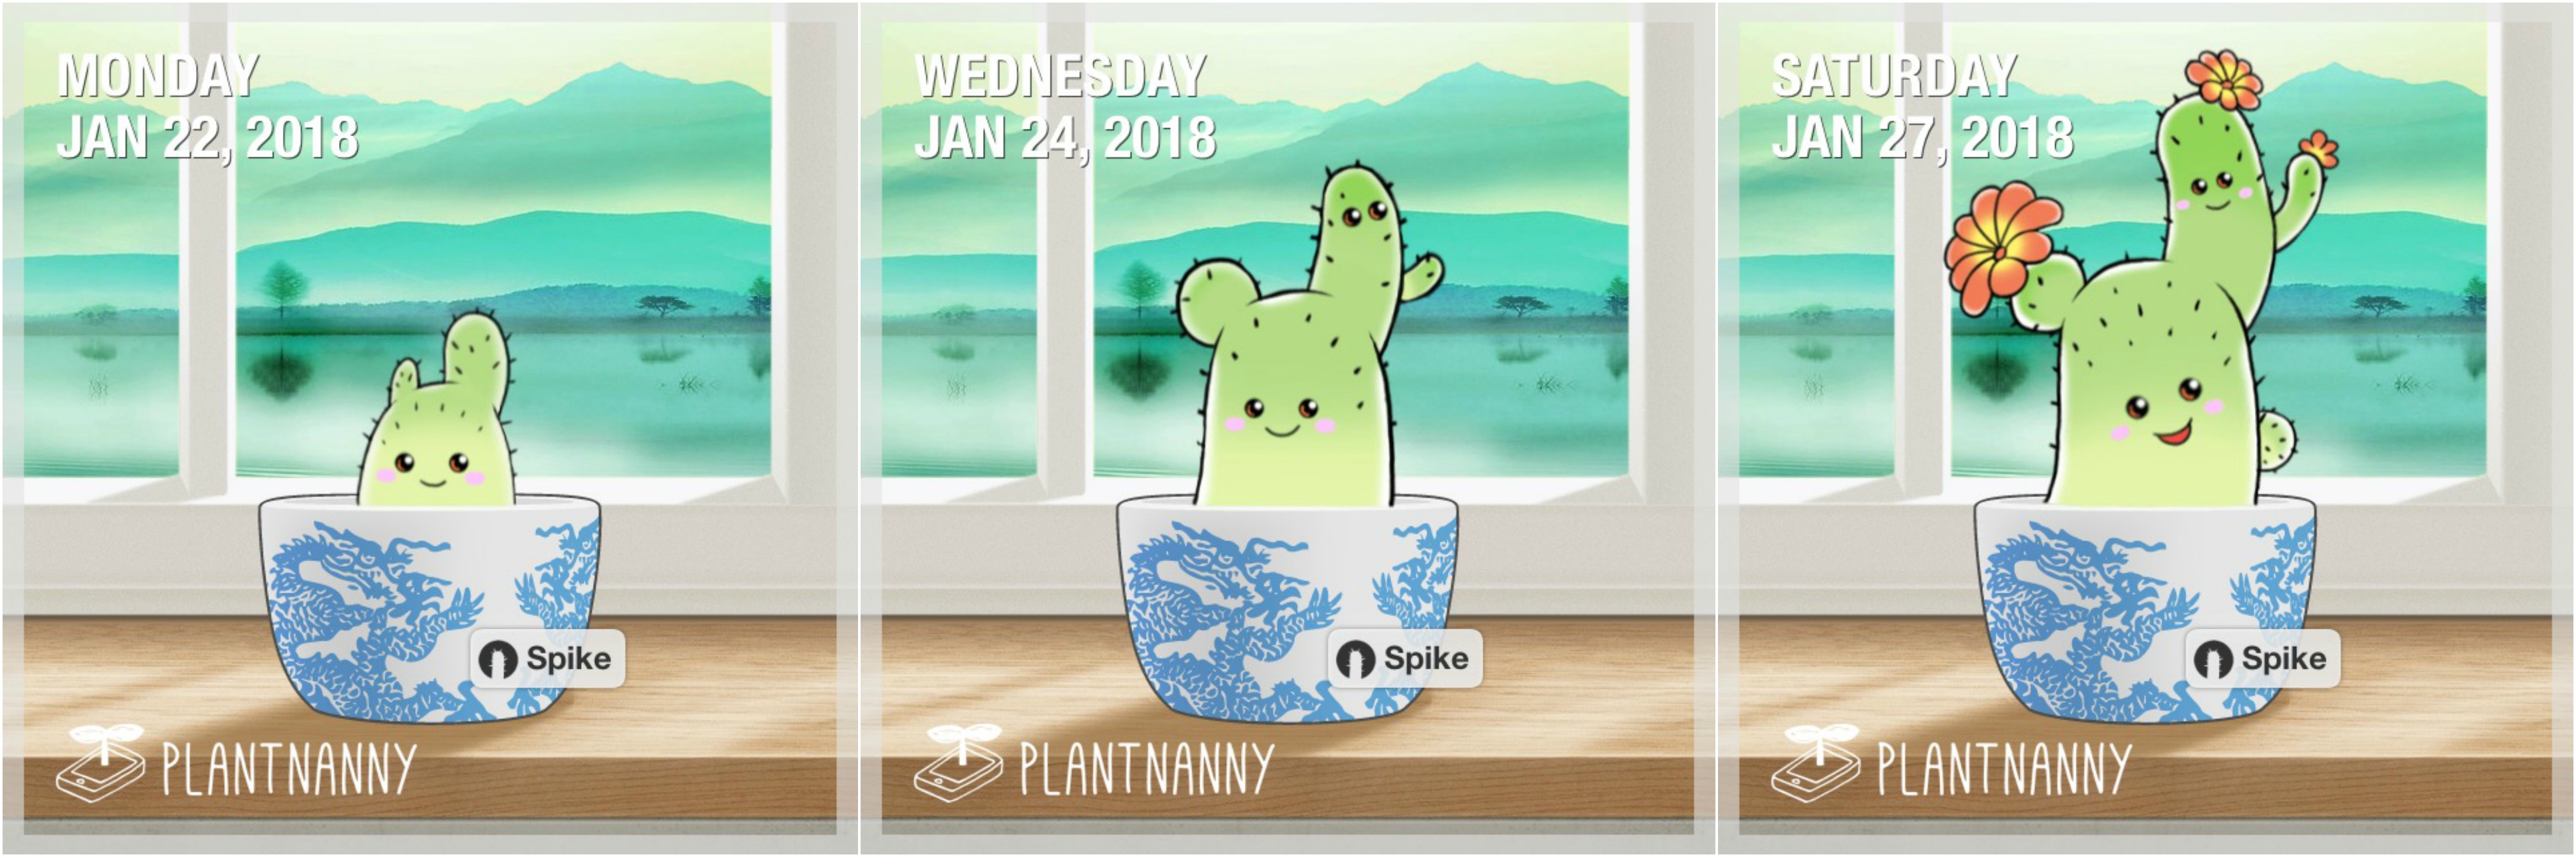 Plant nanny how to move plant to garden